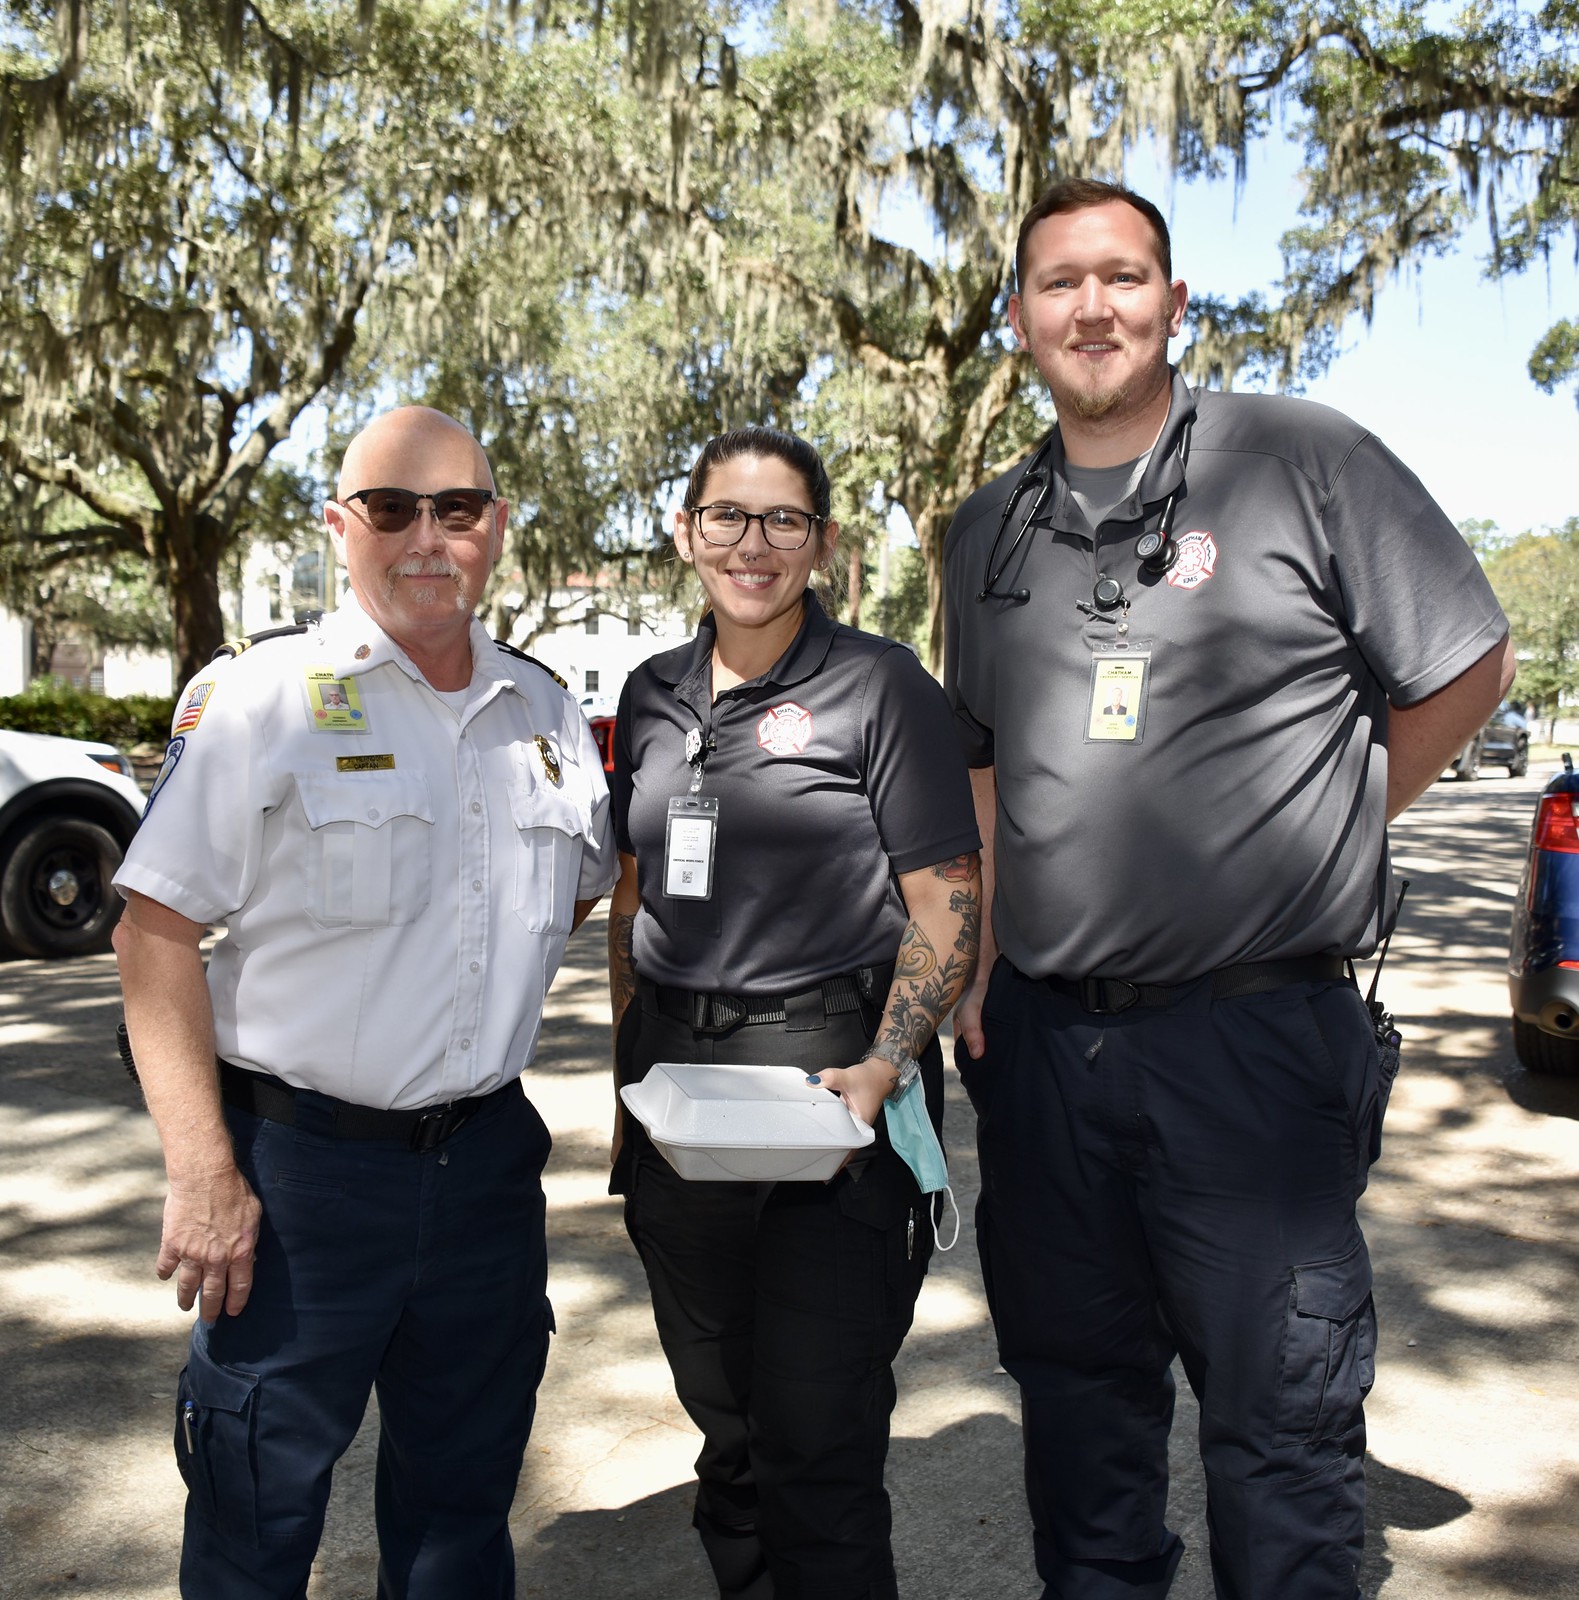 Harris Lowry & Manton’s 9th Annual First Responders Event